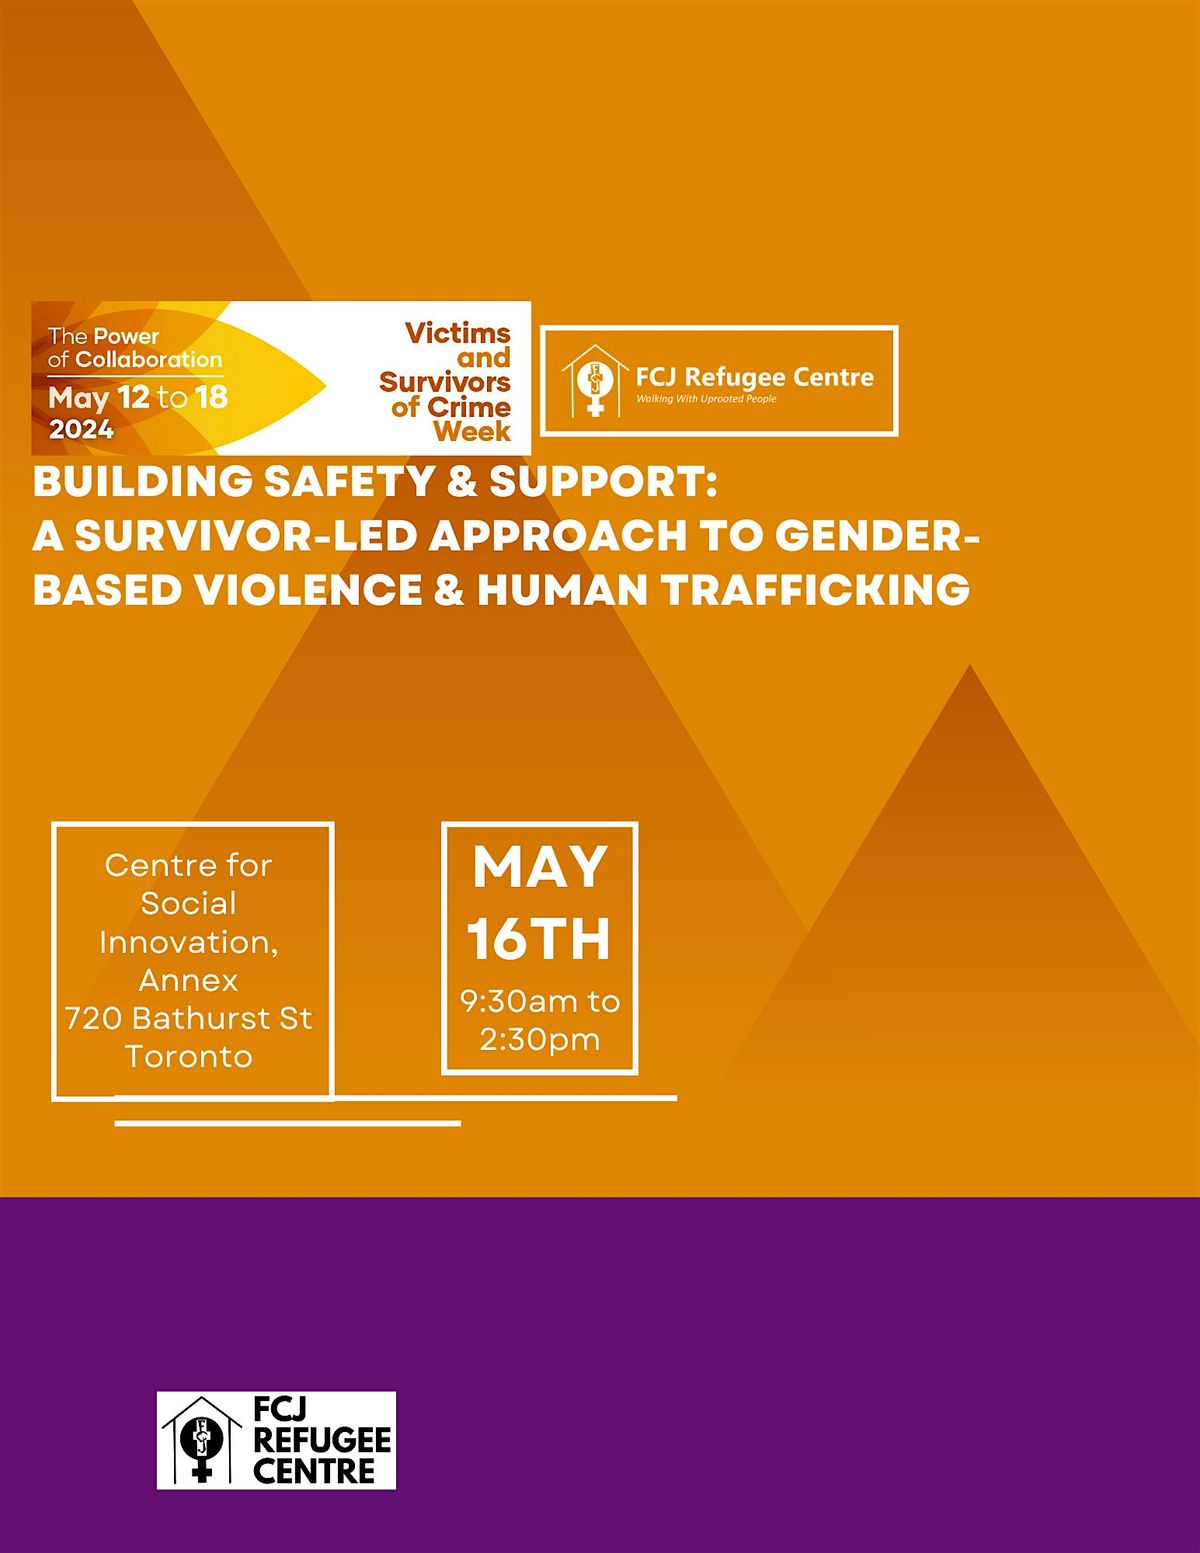 Building Safety & Support for Survivors of HT and GBV